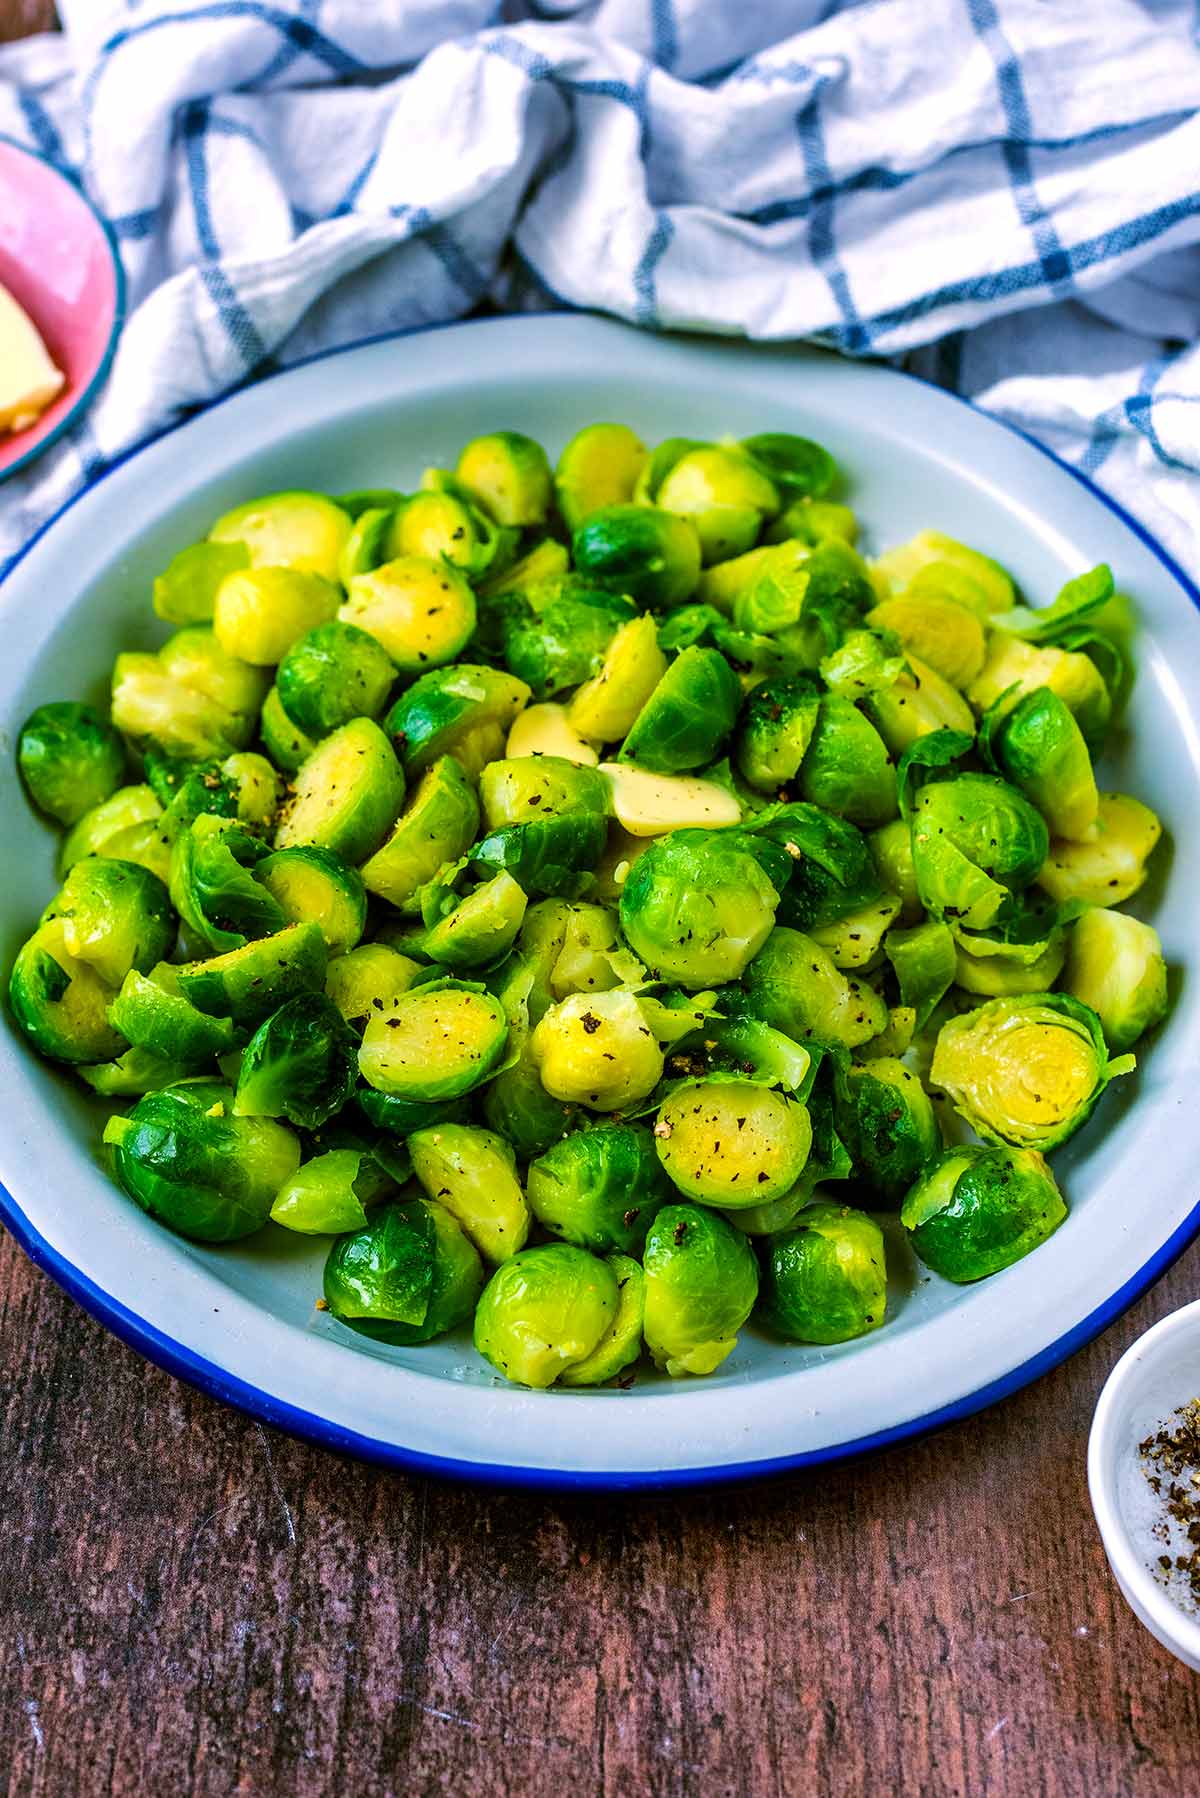 A bowl of Brussels sprouts in front of a towel.